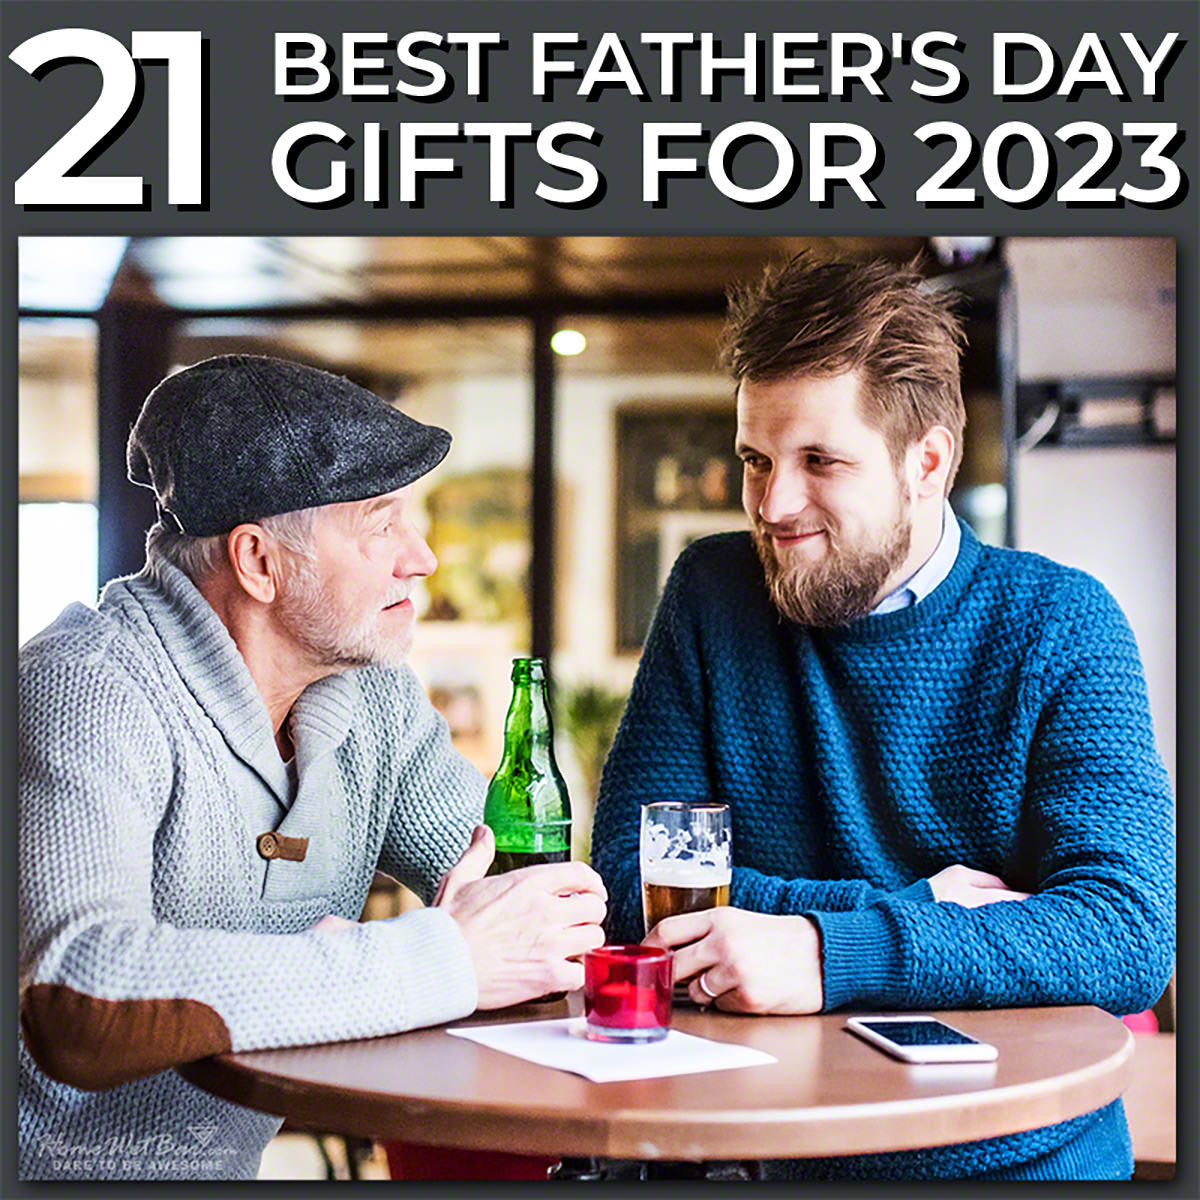 45 Christmas Gifts for Dad He Will Obsess Over - By Sophia Lee